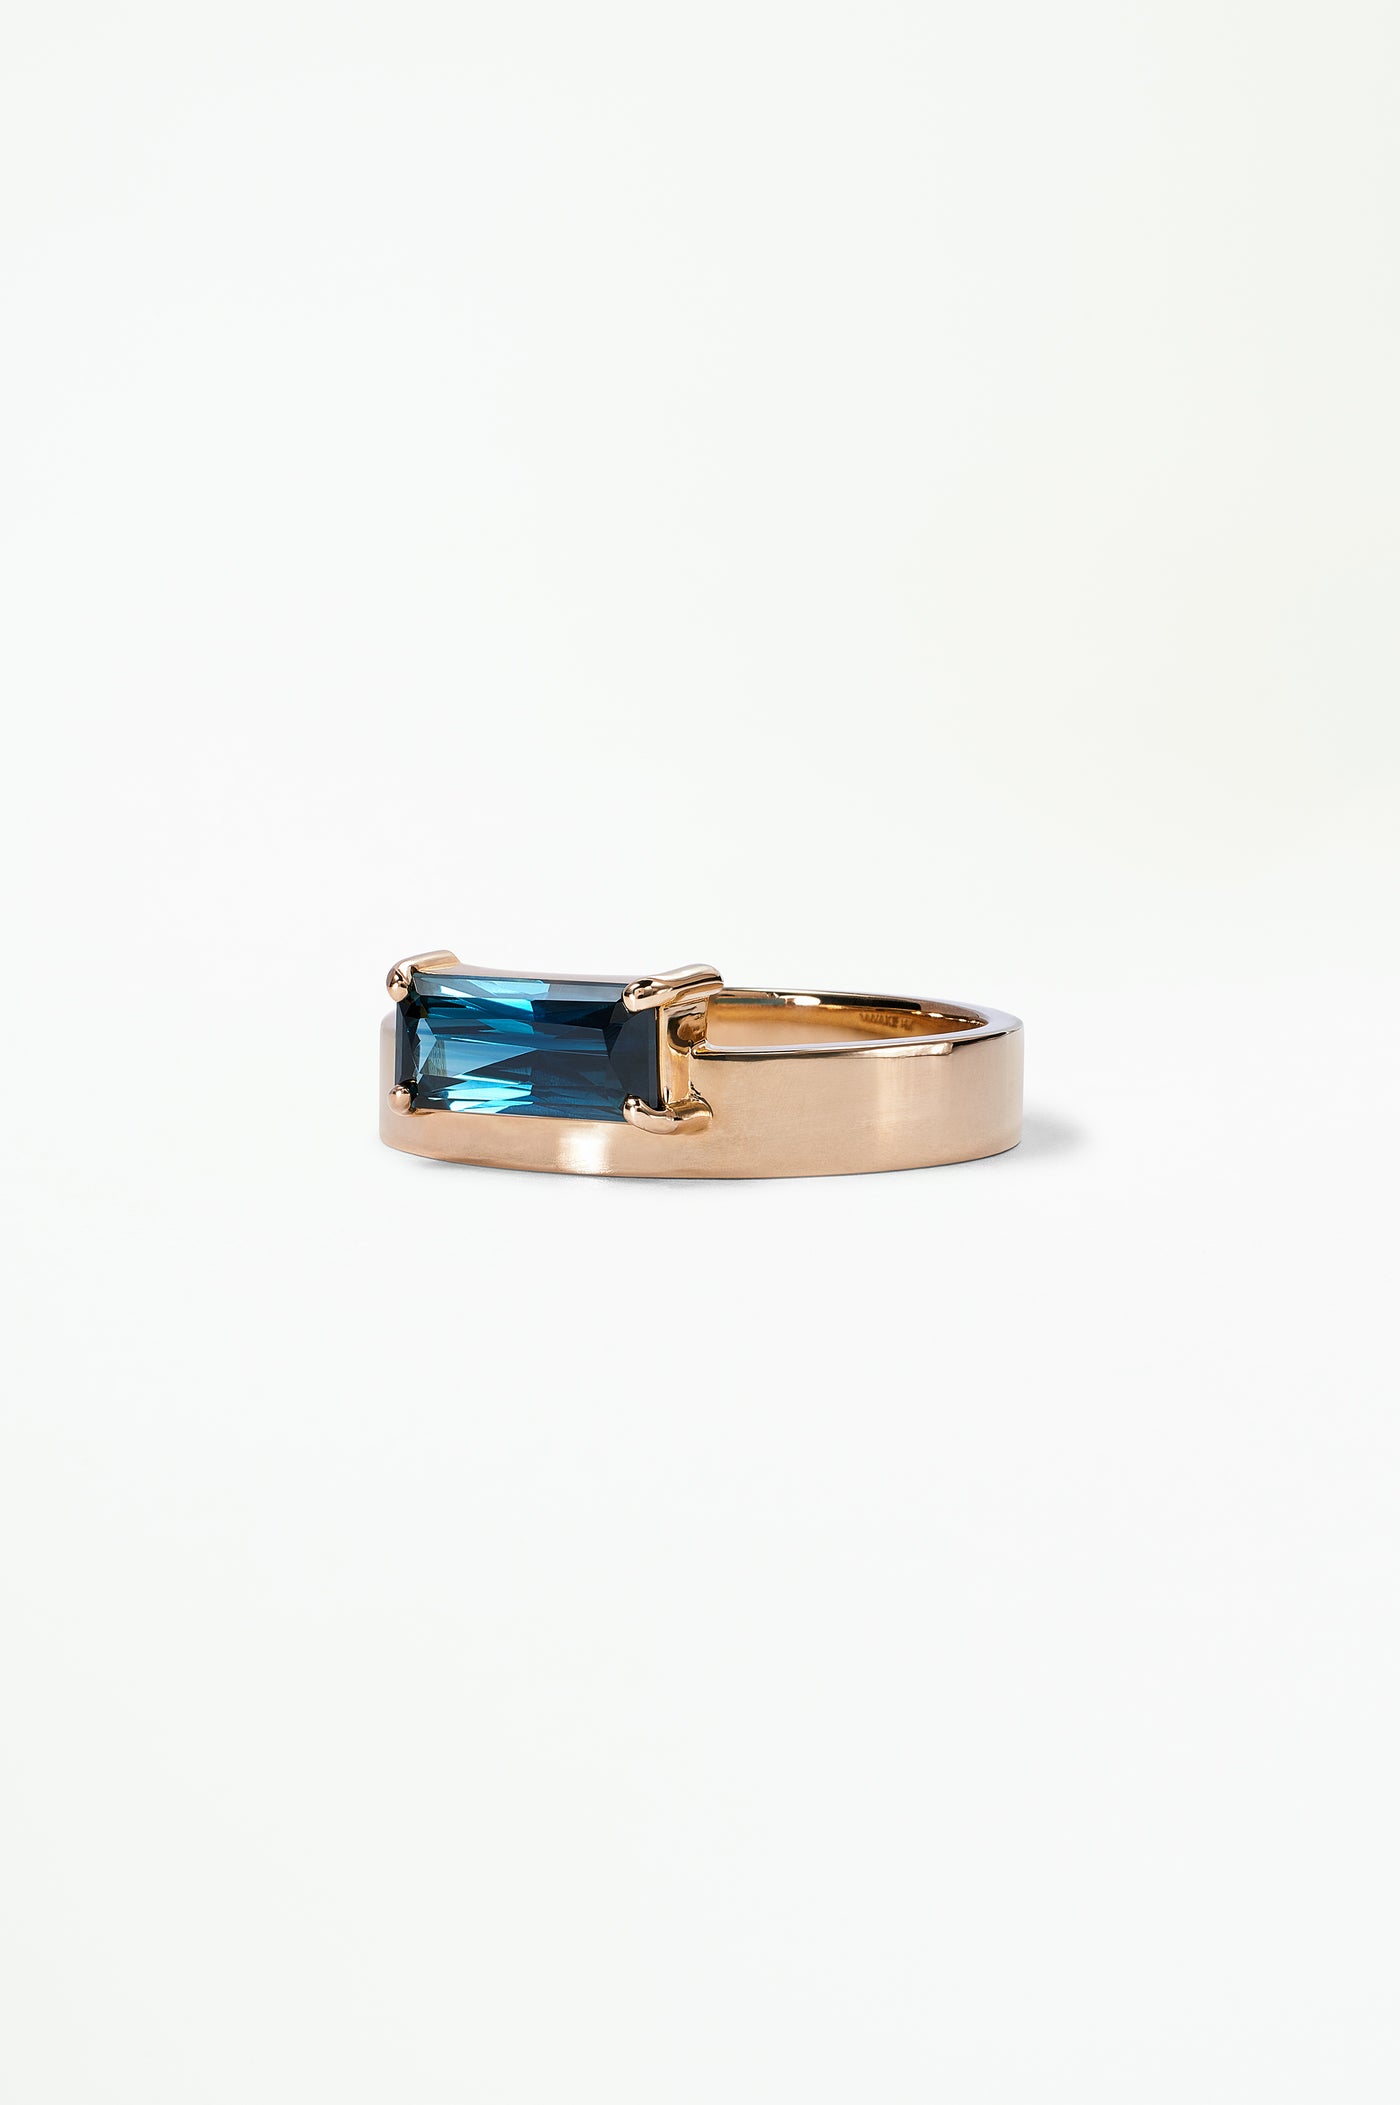 One of a Kind Radiant Cut Teal Sapphire Monolith Ring No. 27